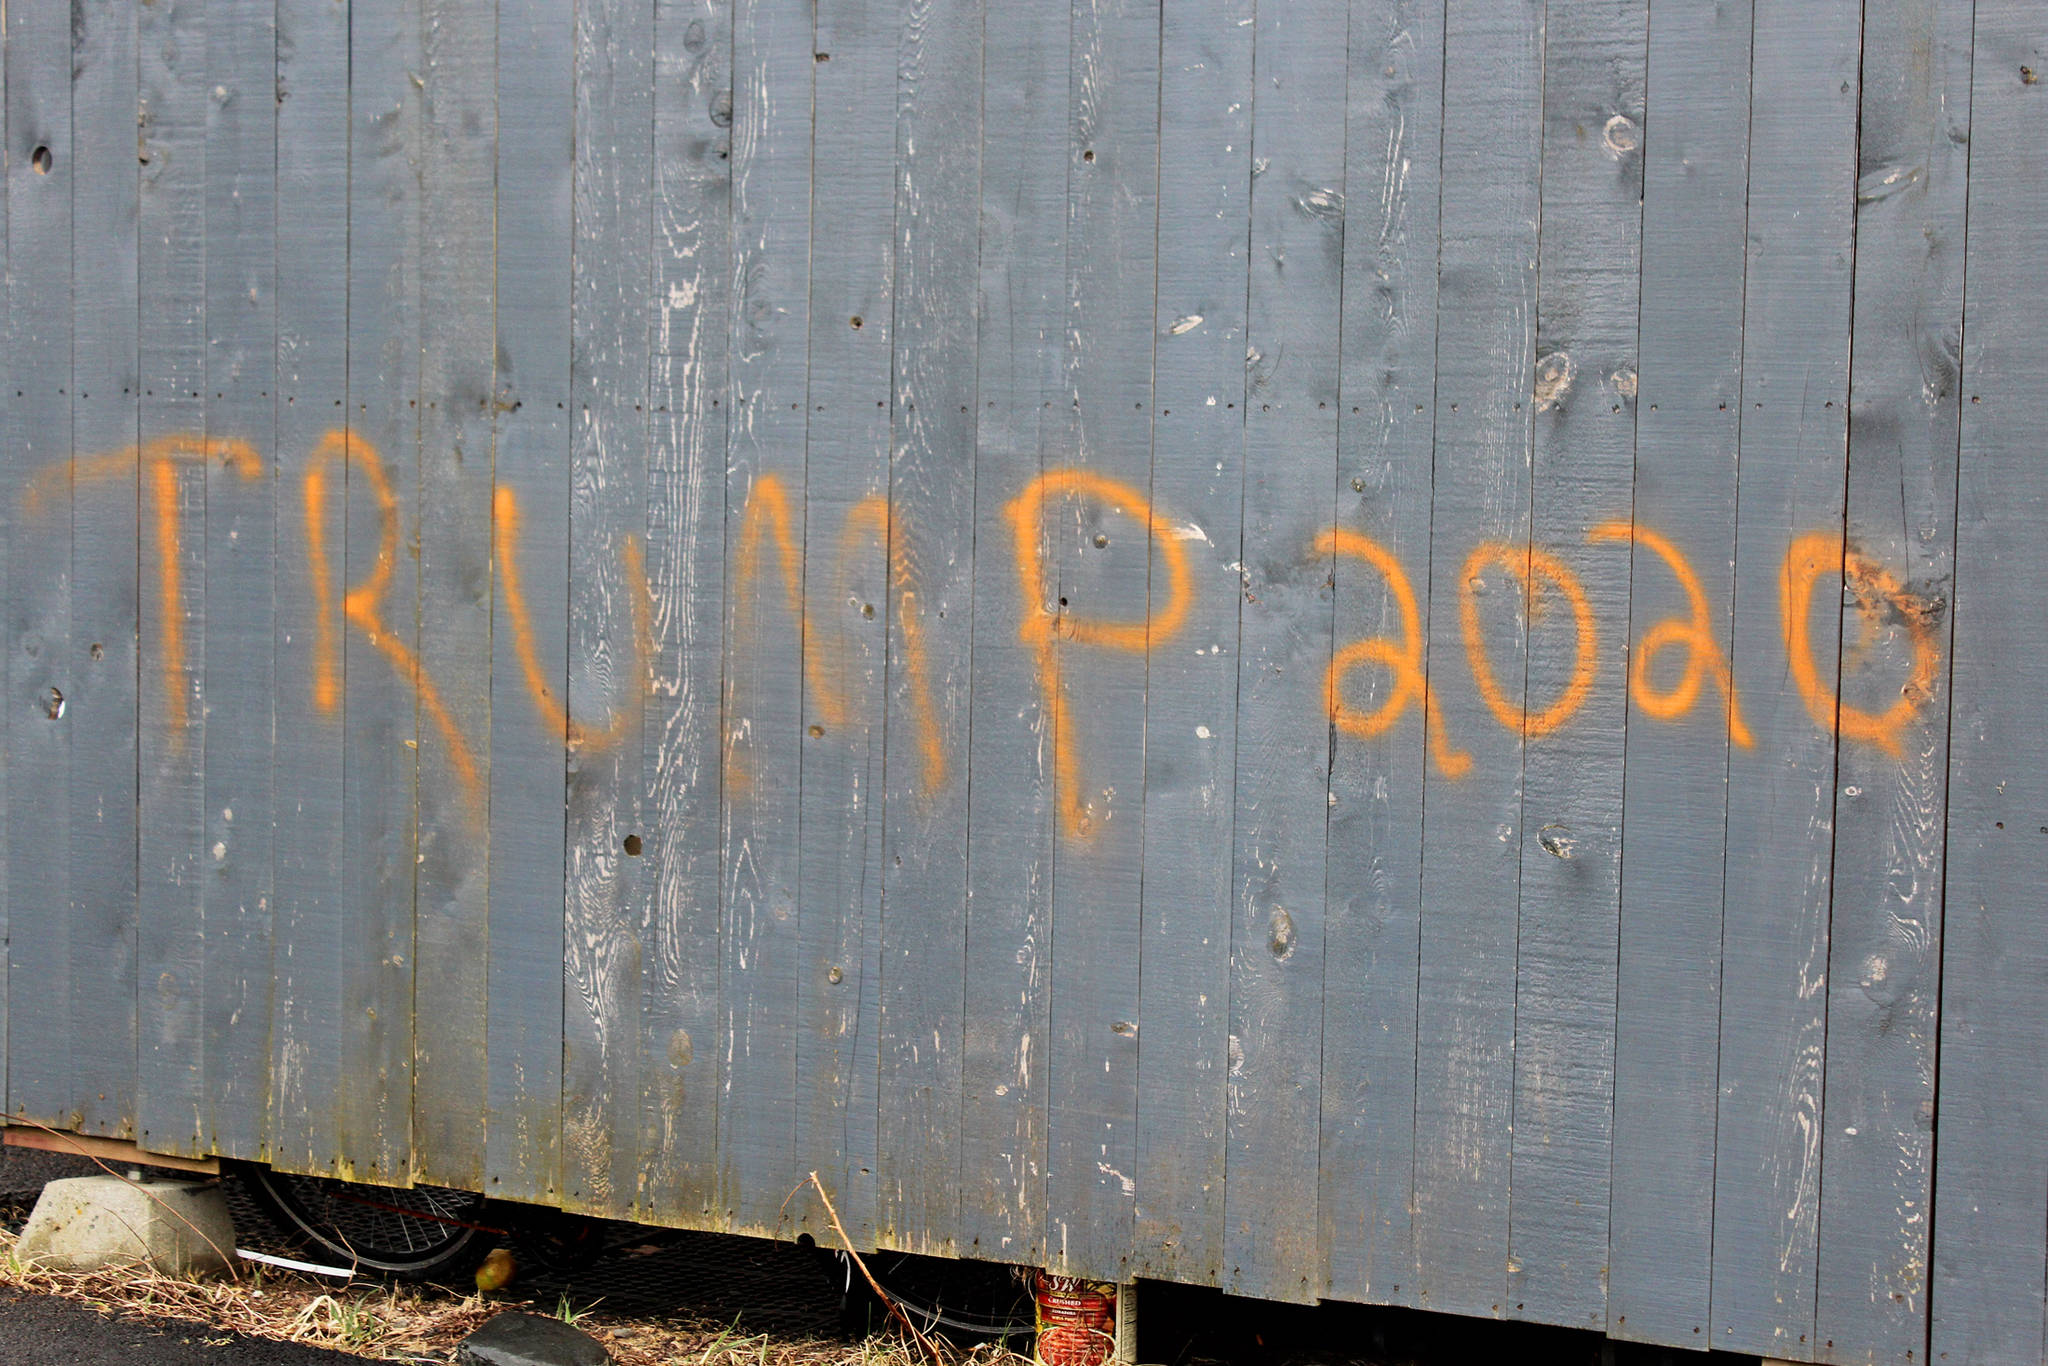 The words “Trump 2020” are spray painted onto a wall at Wasabi’s Bistro, shown here Thursday, March 21, 2019 just outside of Homer, Alaska. (Photo by Megan Pacer/Homer News)